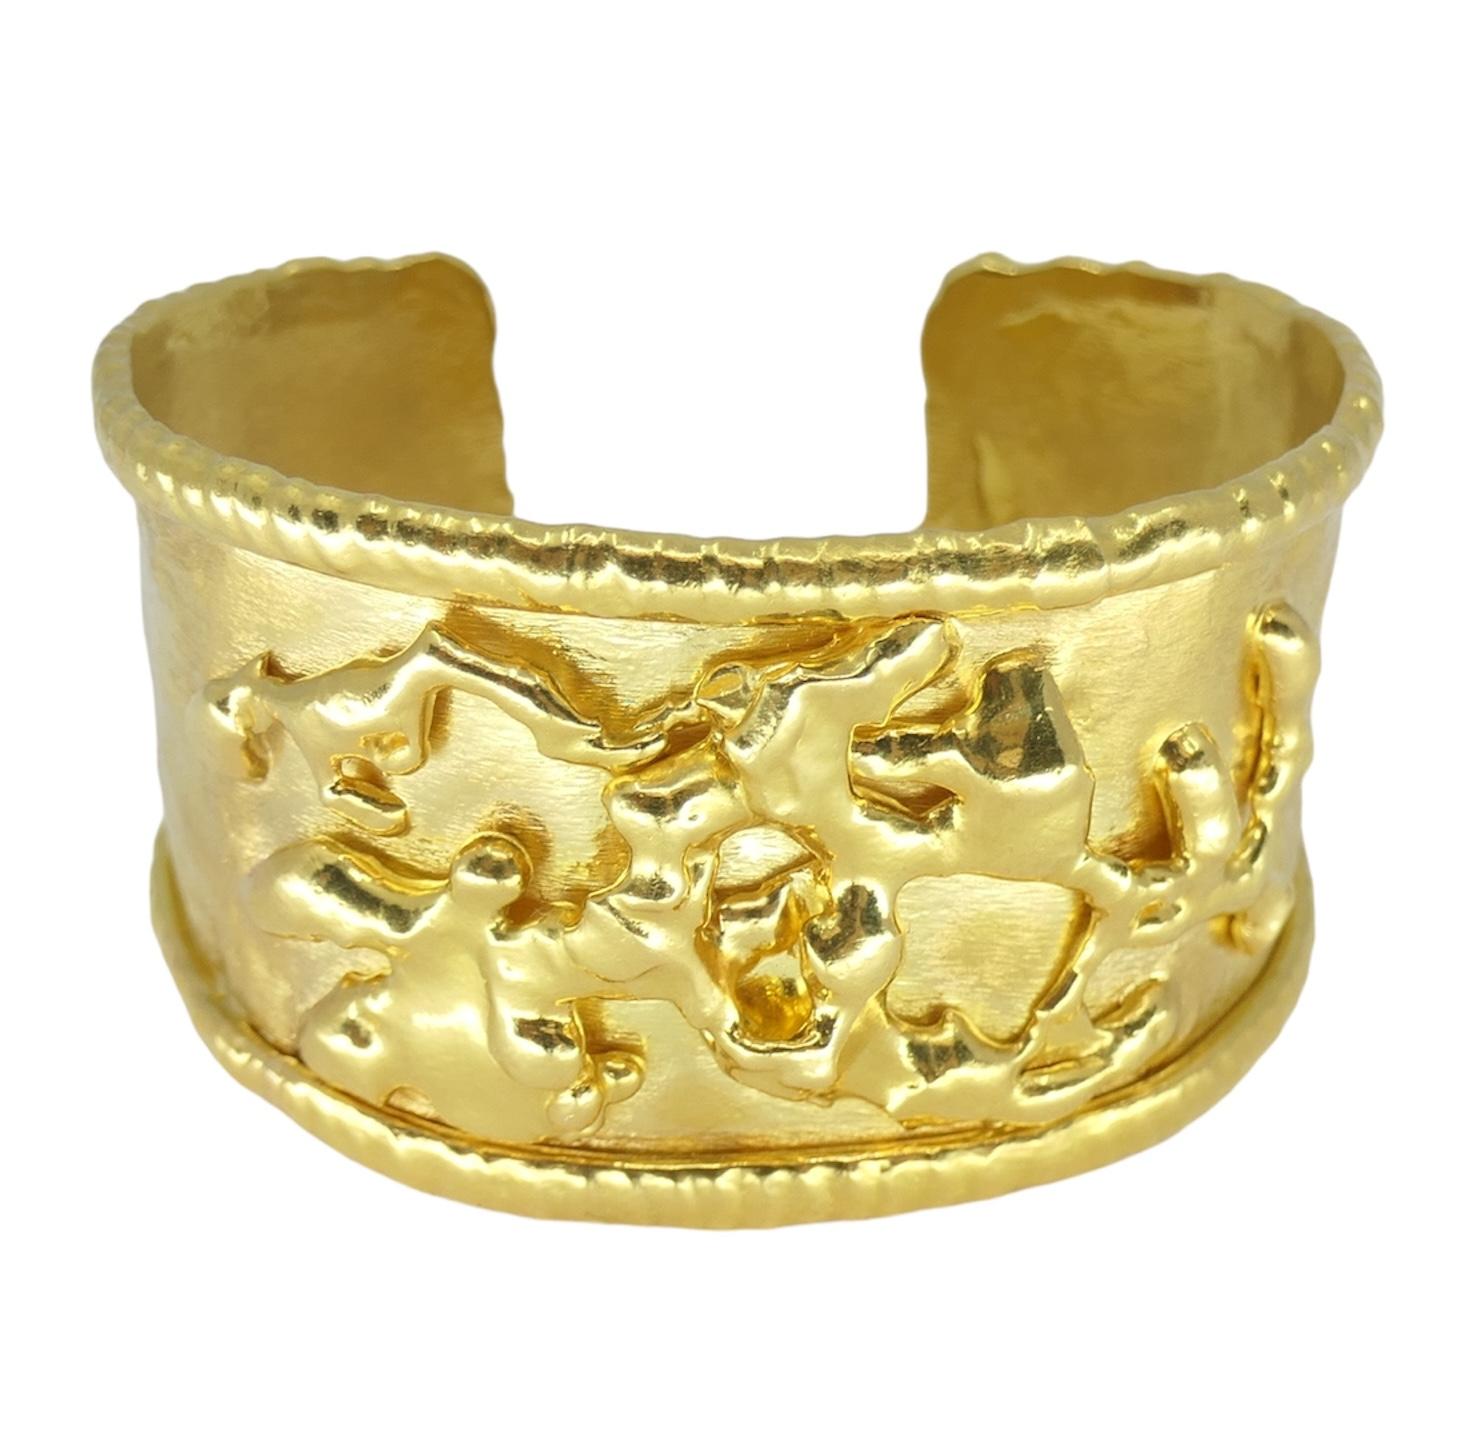 This Jean Mahie 22k yellow gold cuff bracelet is a stunning example of exquisite craftsmanship and timeless design. Marked with the signature of the esteemed jewelry maker, Jean Mahie, it boasts a rich golden hue that radiates sophistication. With